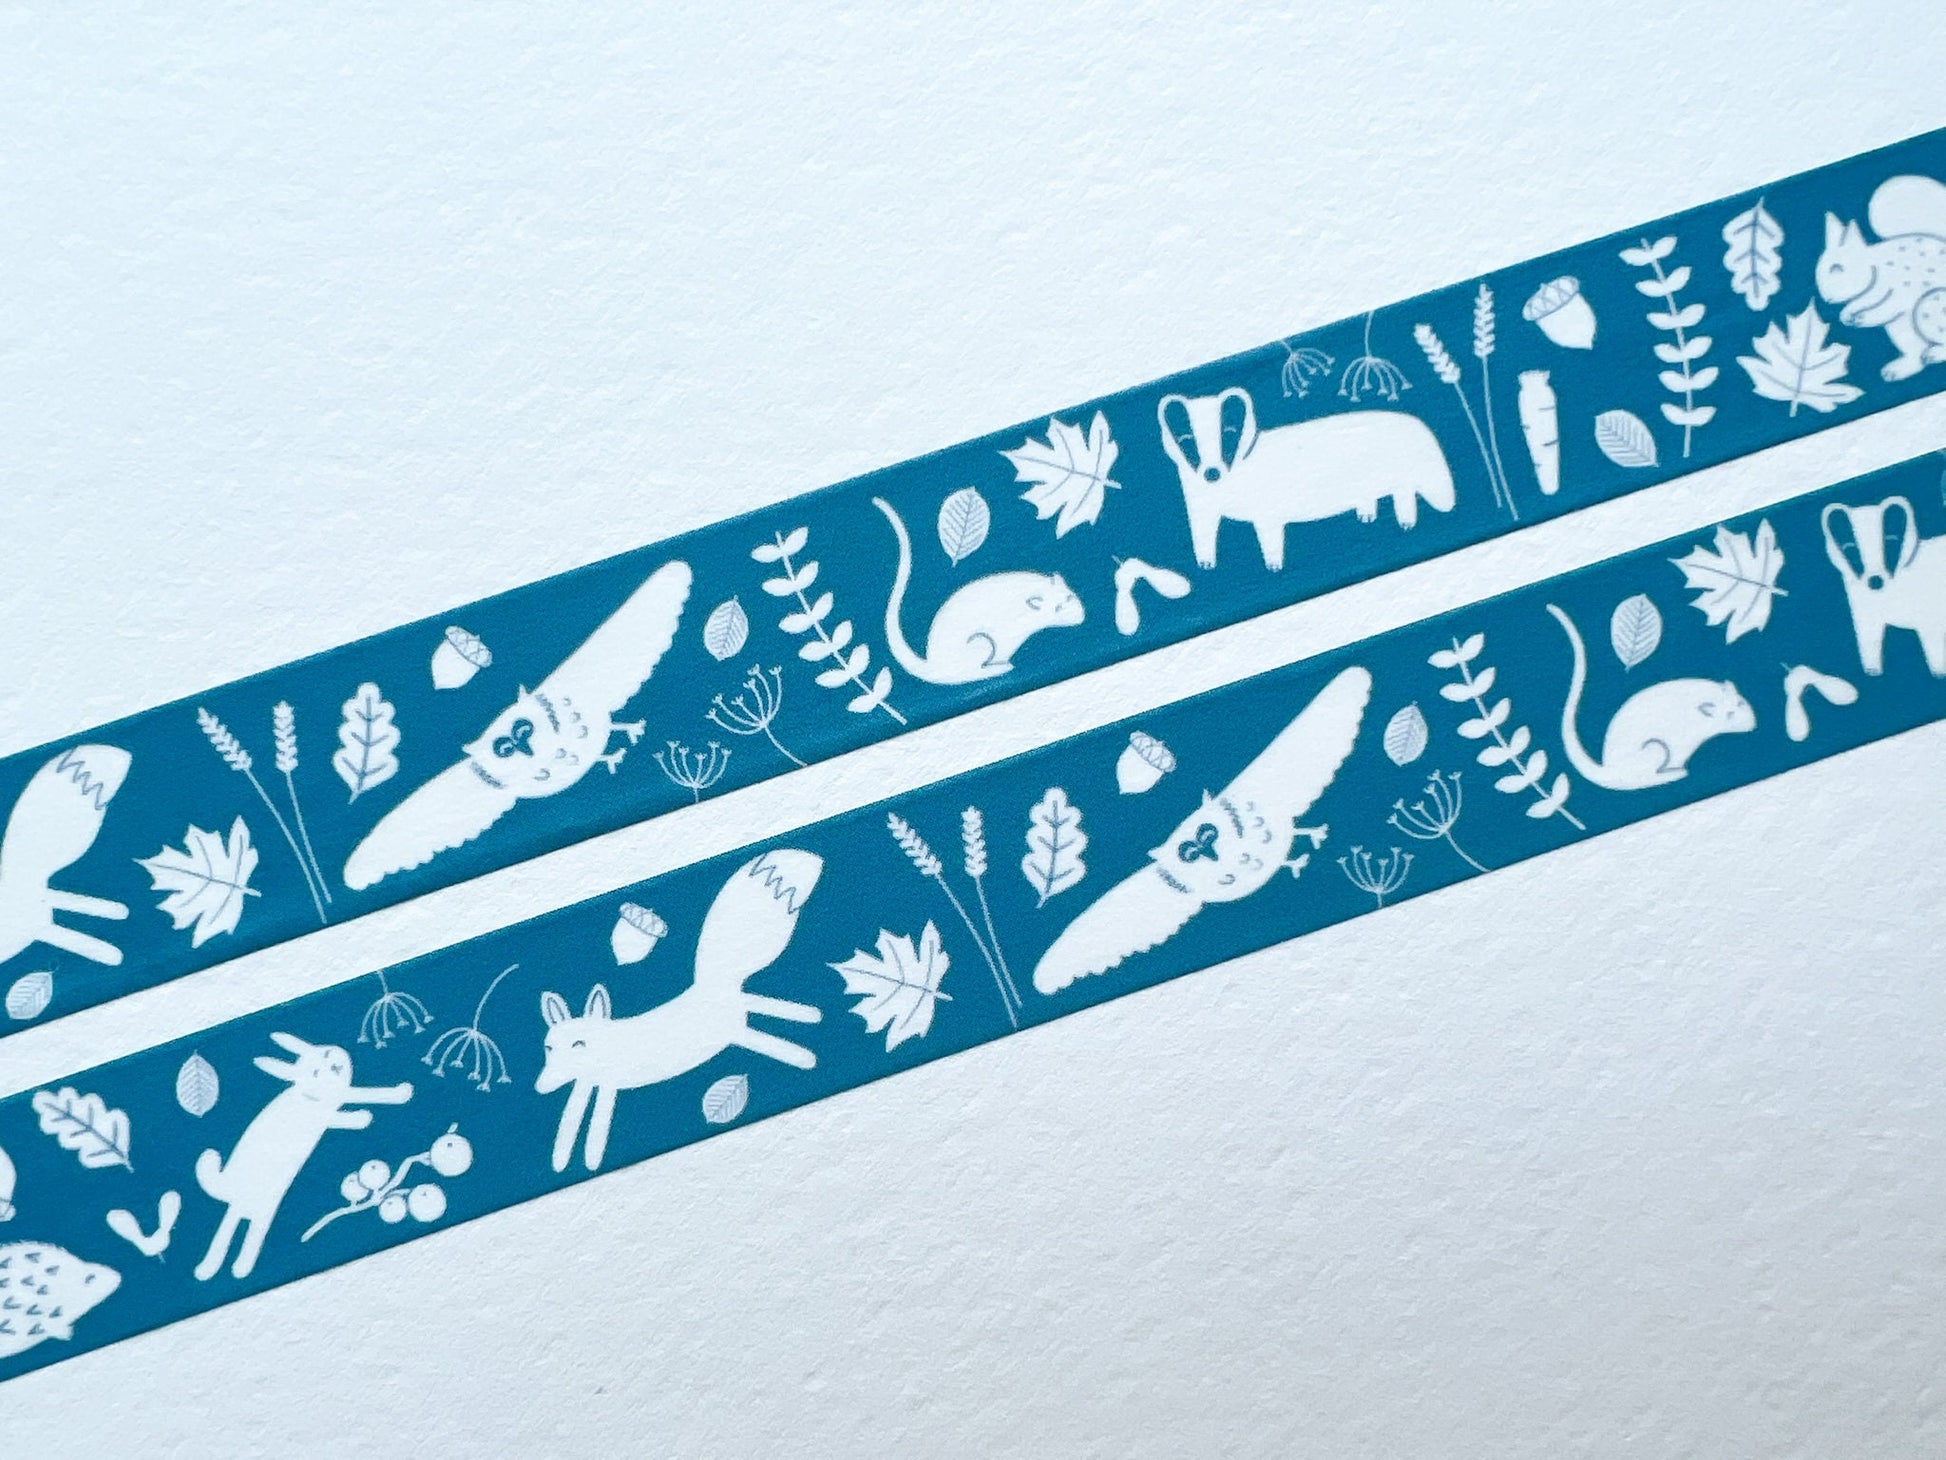 A blue/teal coloured washi tape with white woodland illustrated animals on